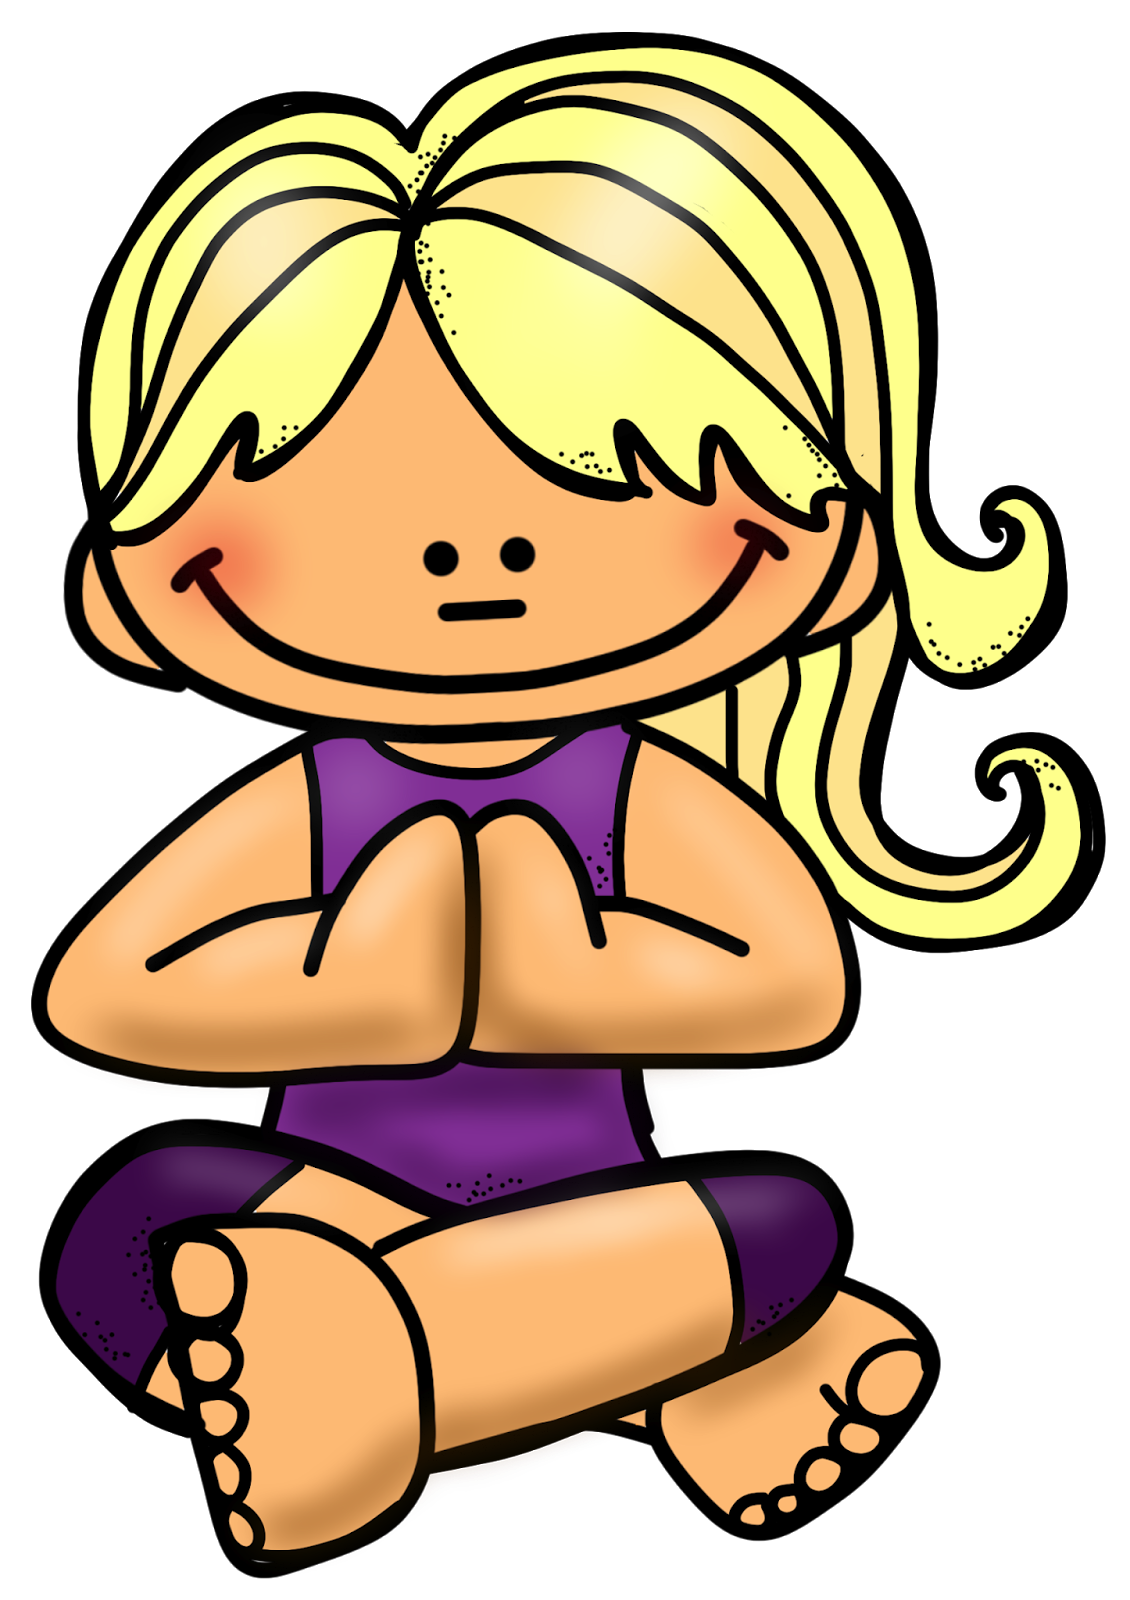 Communication therapy yoga i. Janitor clipart classroom